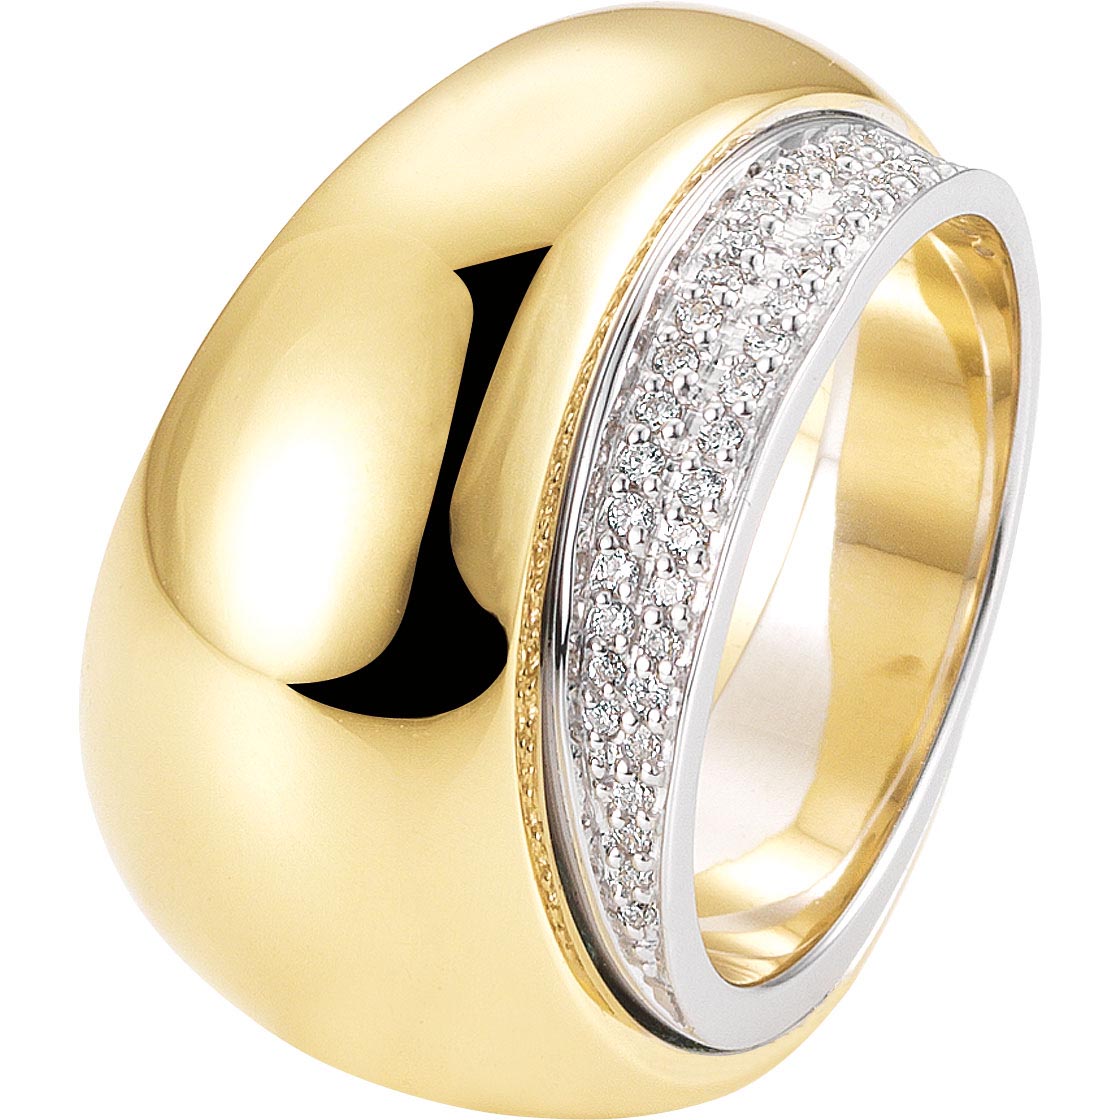 Get the best deals on 18k Yellow Gold Fine rings Sterling Silver Cubic Zirconia jewelry wholesaler